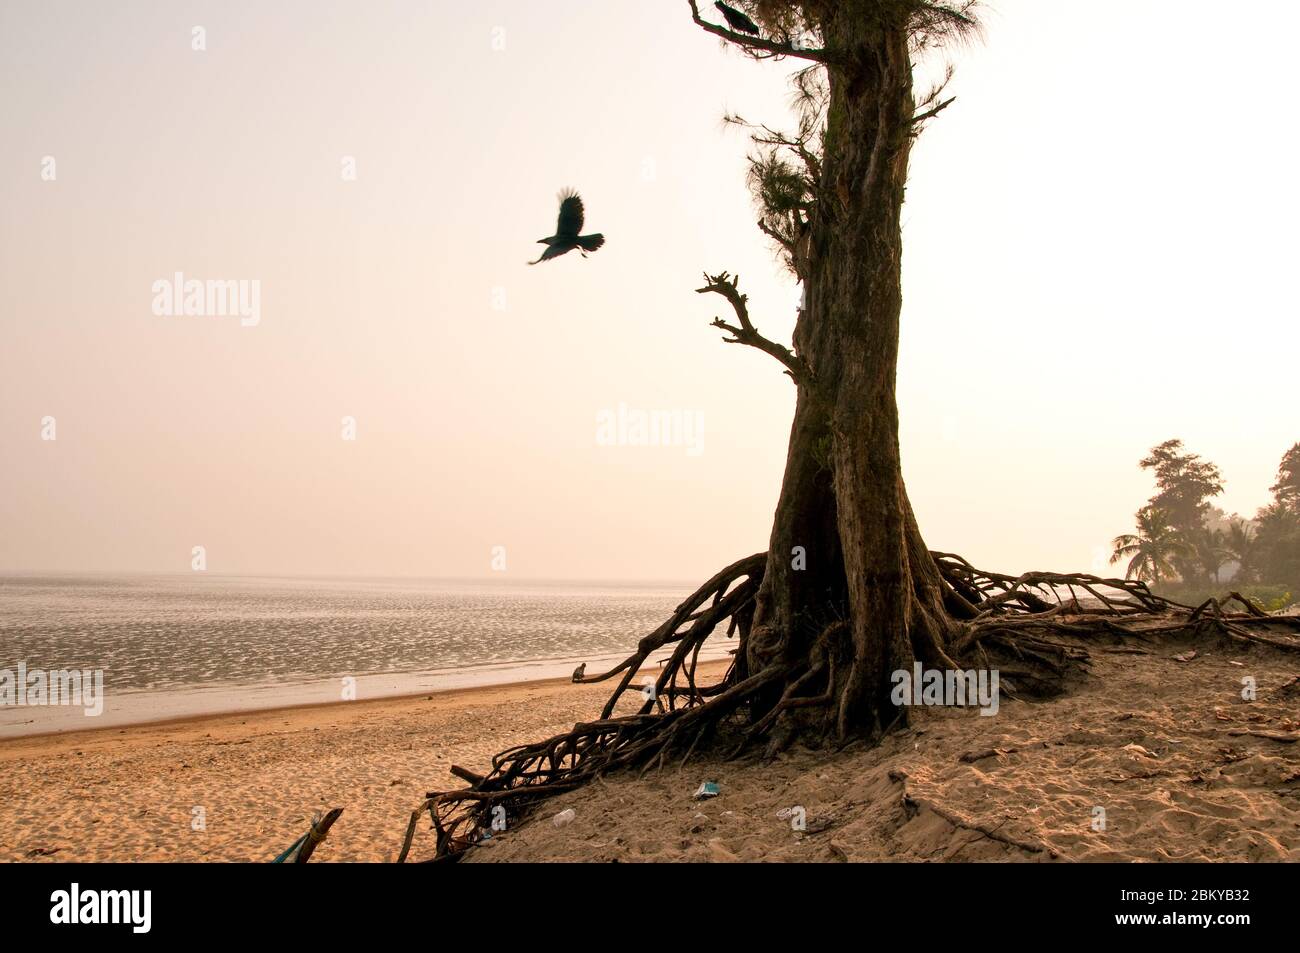 Beautiful scene of sea beach with tree and flying bird on the foreground at Chandipur, Orissa, India. Stock Photo